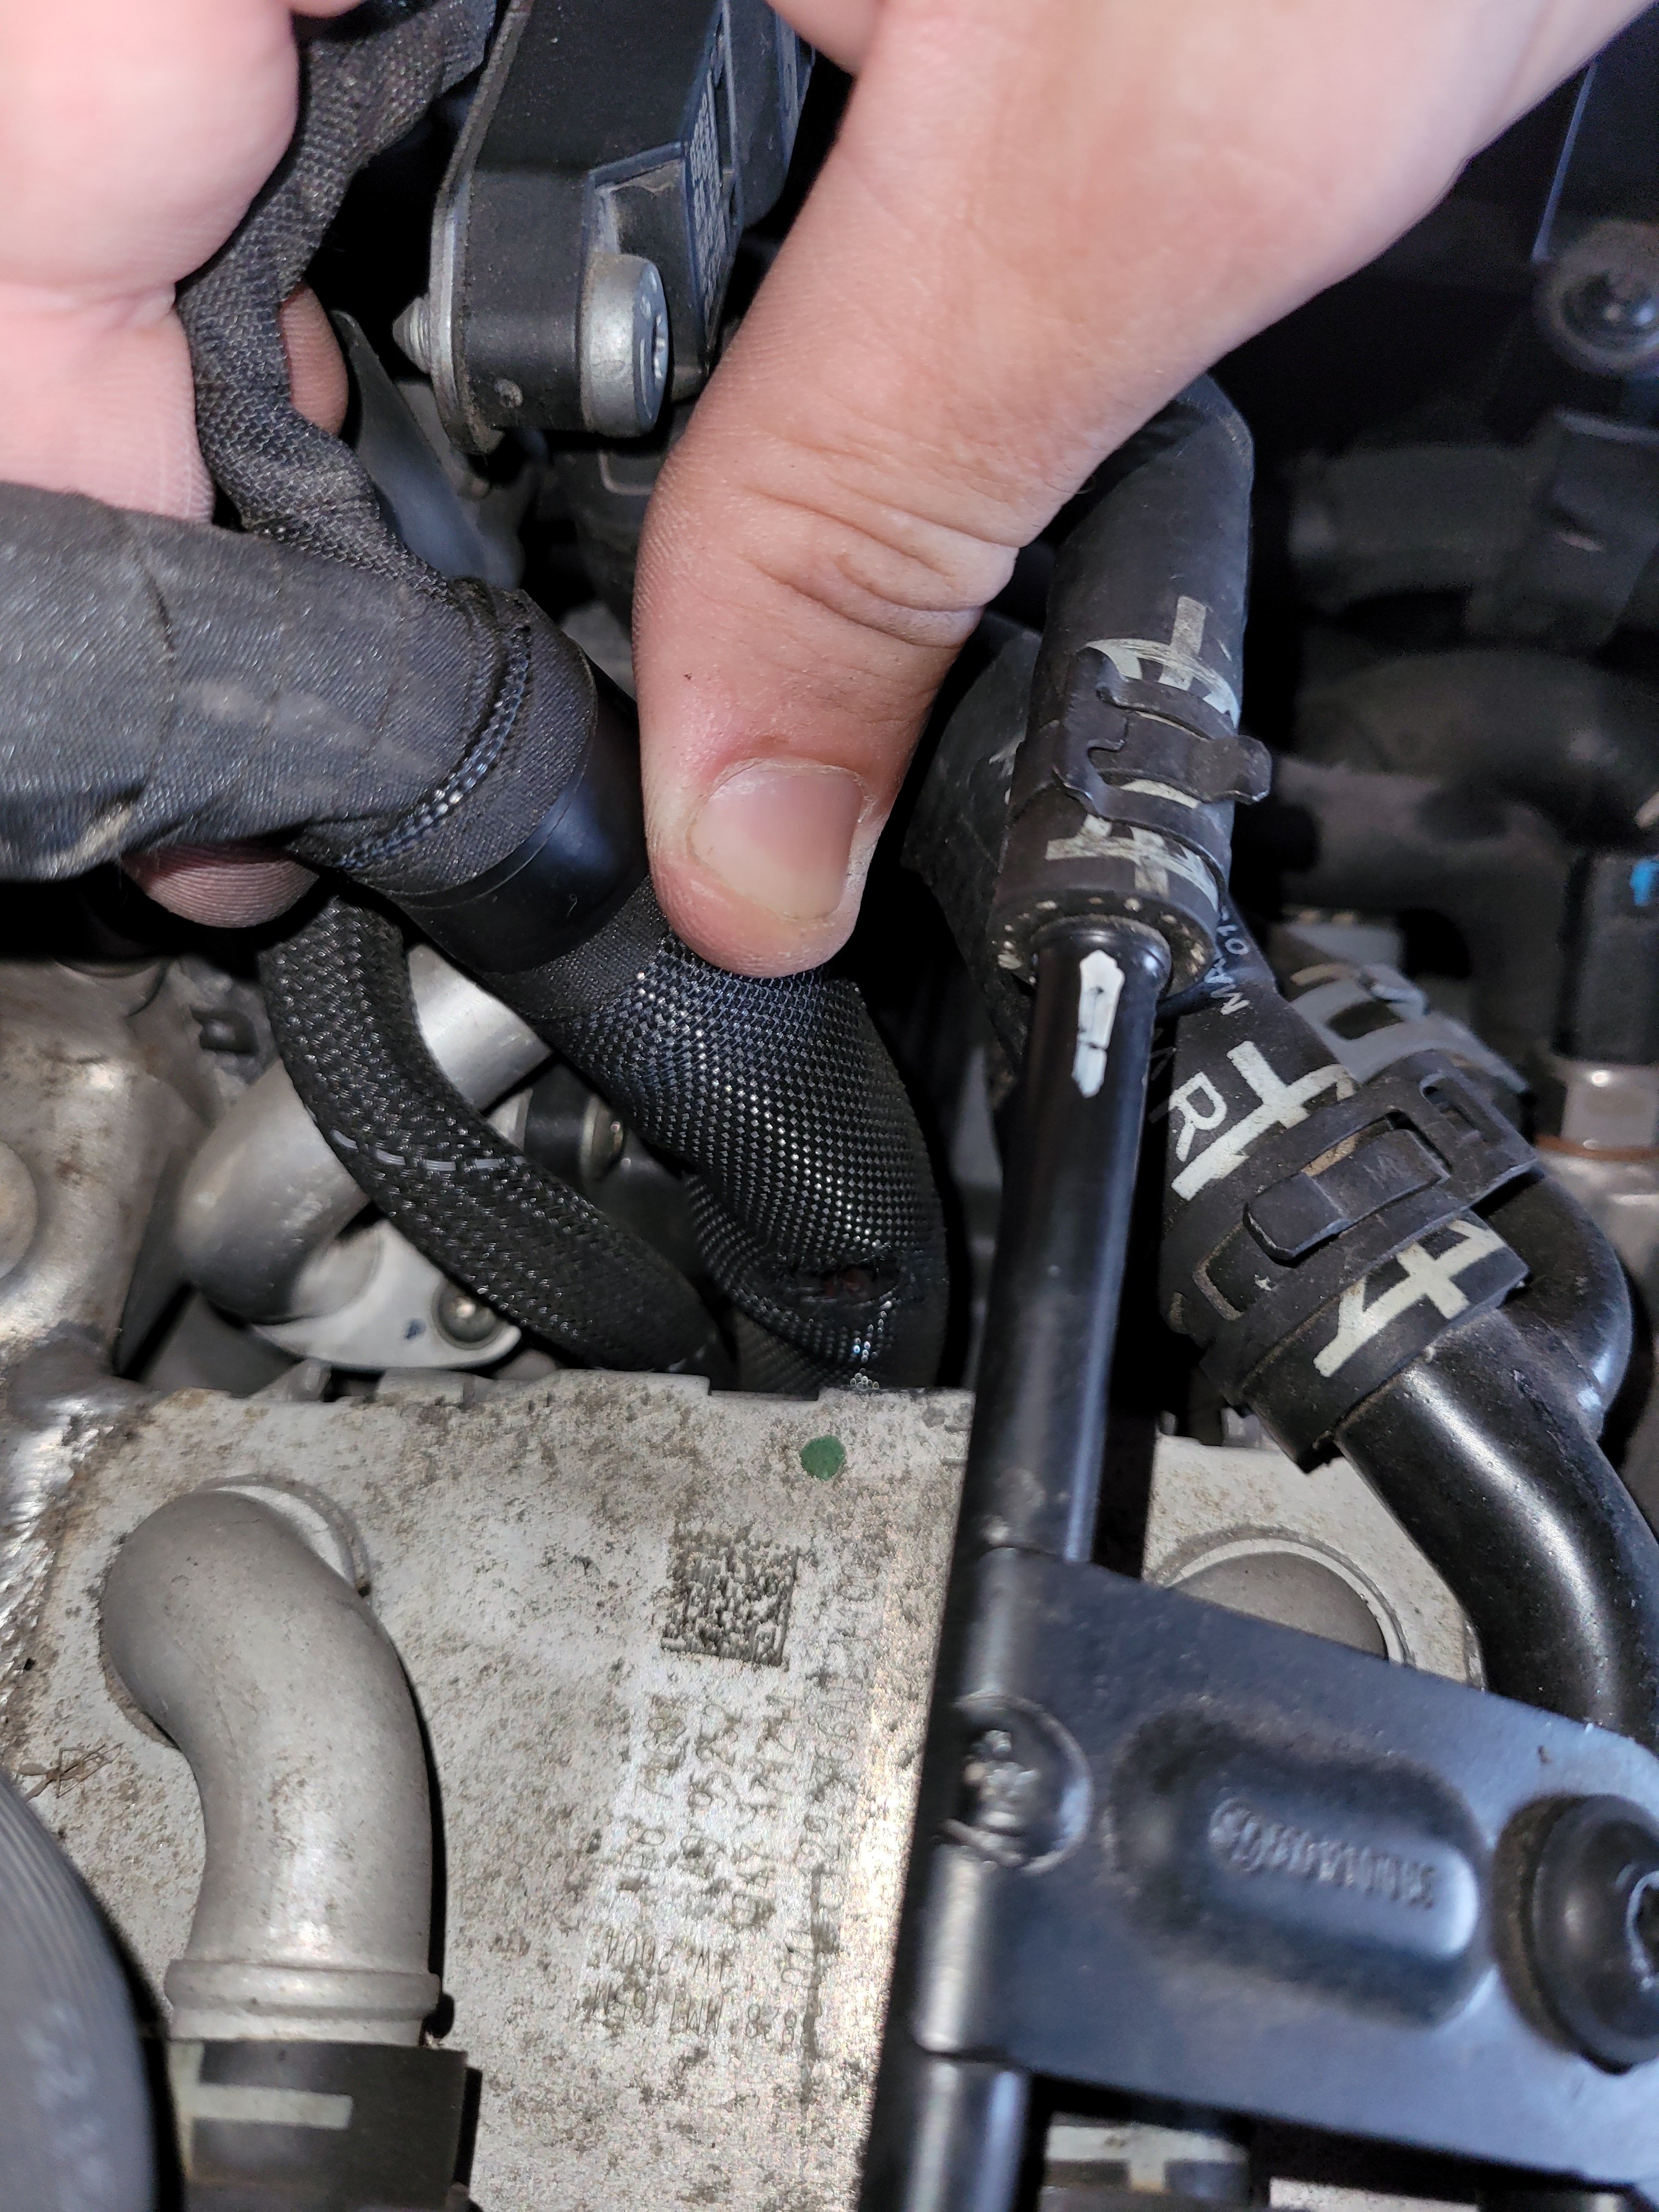 How To Replace The Coolant Temperature Sensor On An Audi/VW 1.8t (Audi A4,  A6, Golf, Passat, & More)